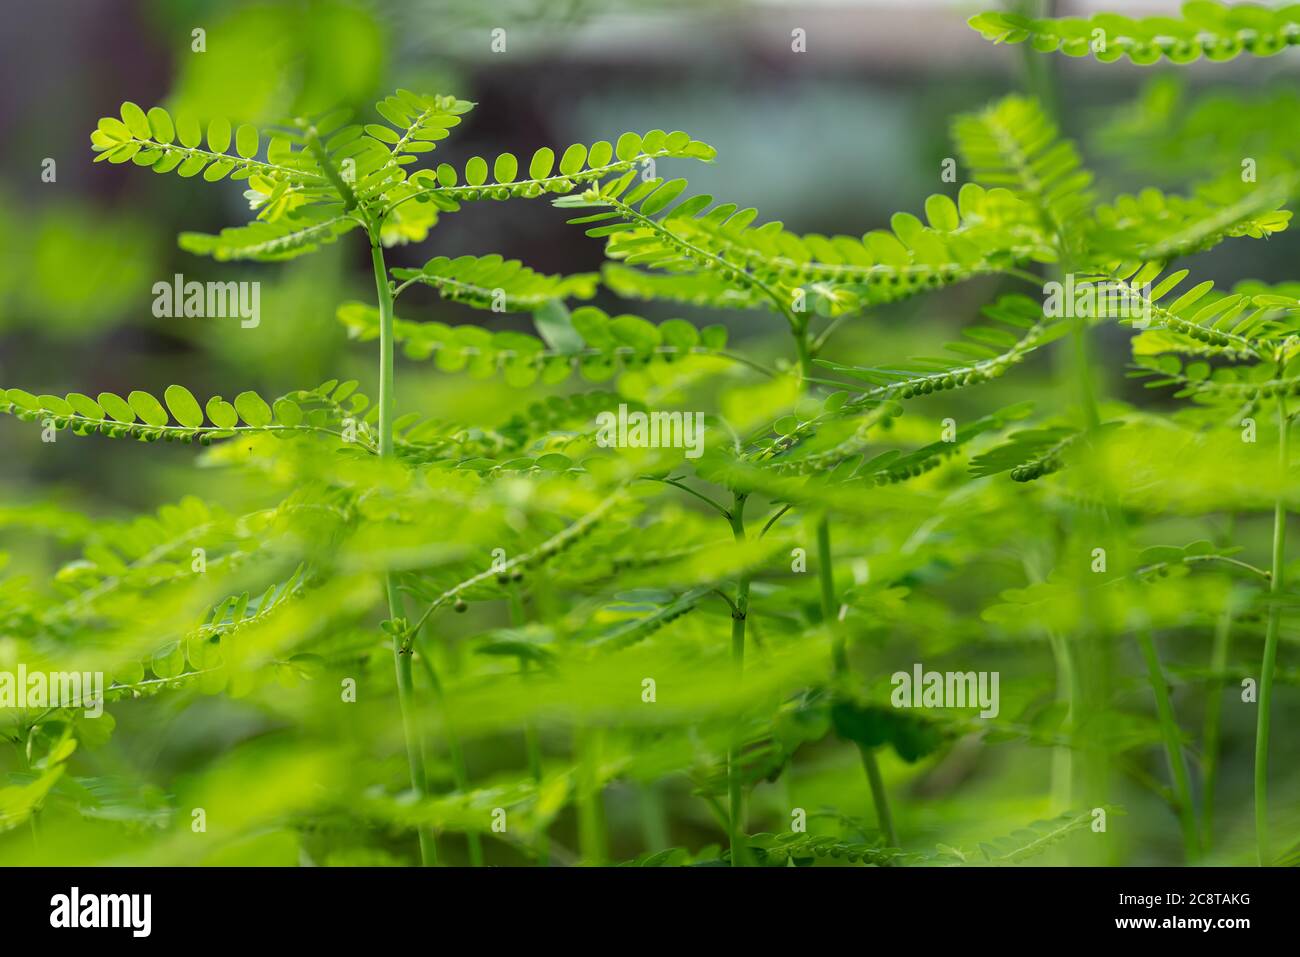 Phyllanthus niruri herb plant and other name, Seed-under-leaf, Phyllanthus amarus Schumach & Thonn. Stock Photo